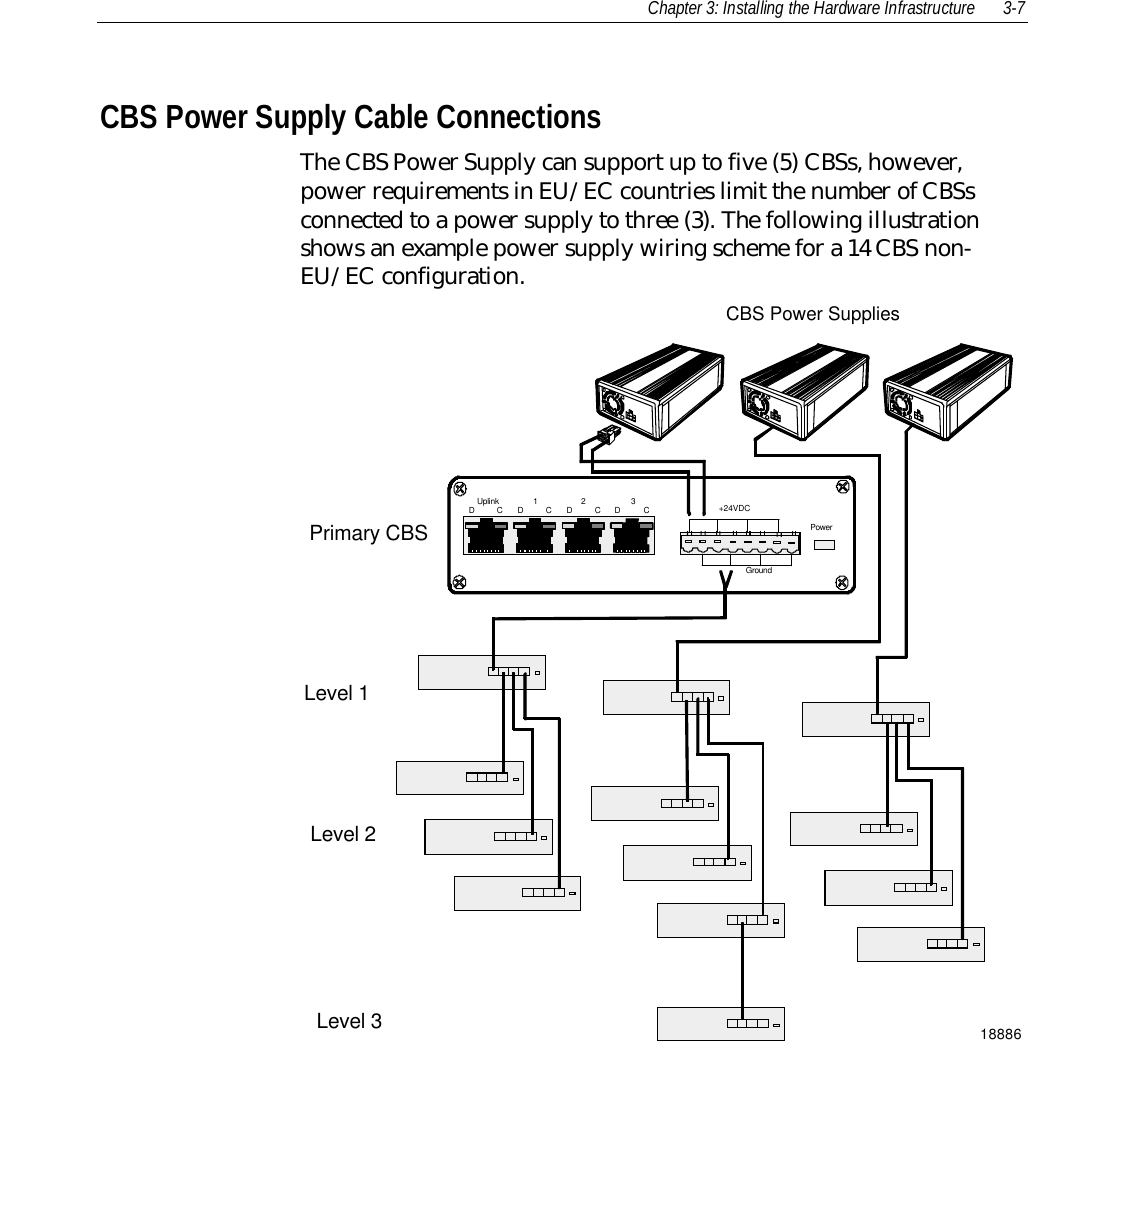 Chapter 3: Installing the Hardware Infrastructure 3-7CBS Power Supply Cable ConnectionsThe CBS Power Supply can support up to five (5) CBSs, however,power requirements in EU/EC countries limit the number of CBSsconnected to a power supply to three (3). The following illustrationshows an example power supply wiring scheme for a 14 CBS non-EU/EC configuration.18886CBS Power SuppliesLevel 1Level 2Primary CBS PowerUplinkDDDDCCCC12 3Ground+24VDCLevel 3